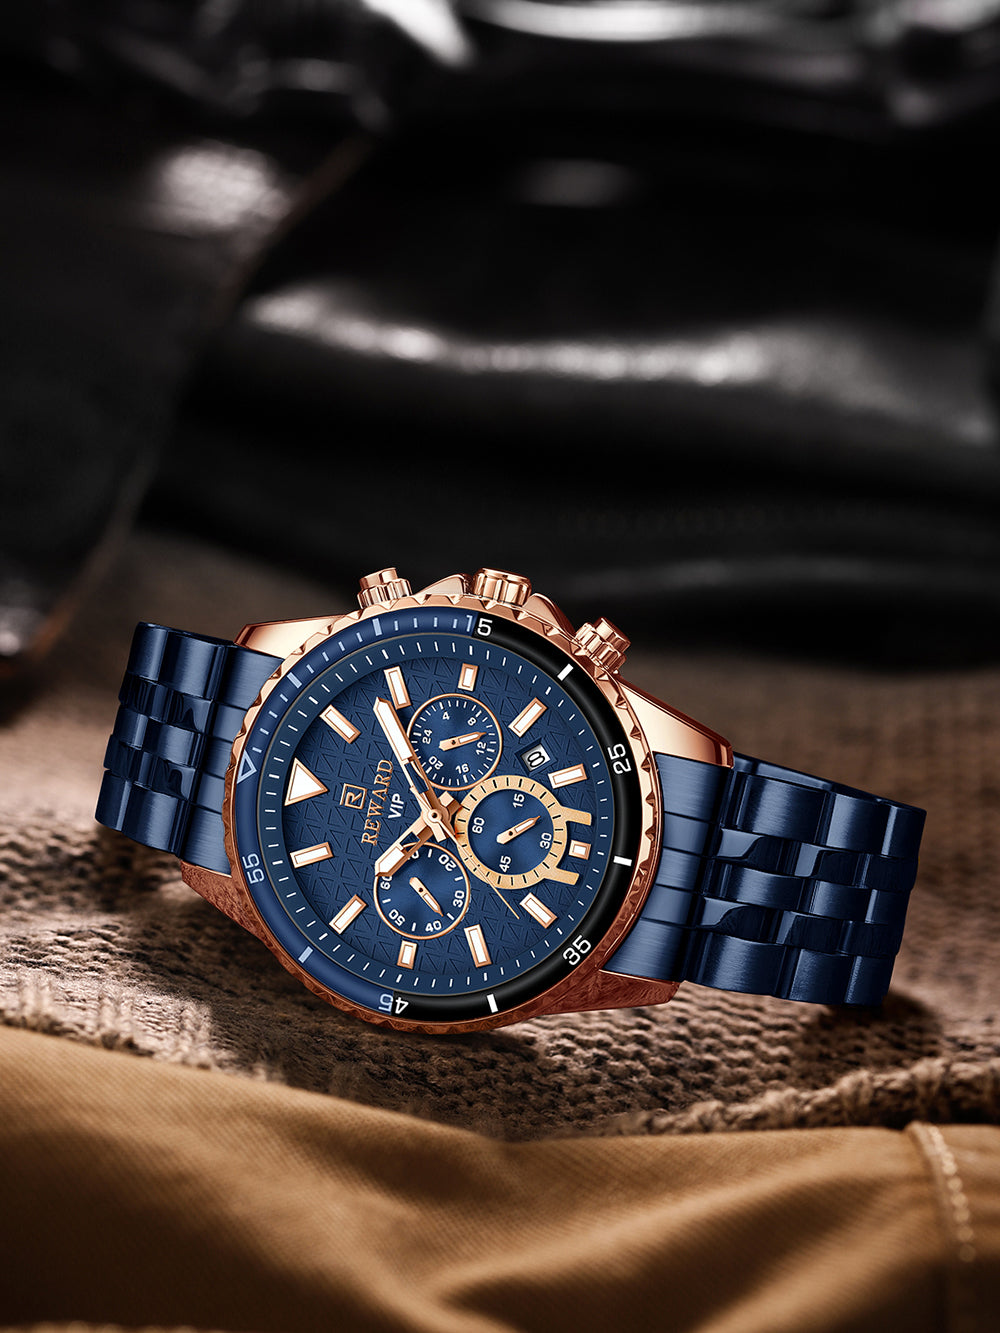 Solana Multifunction Watch Steel, Blue colour